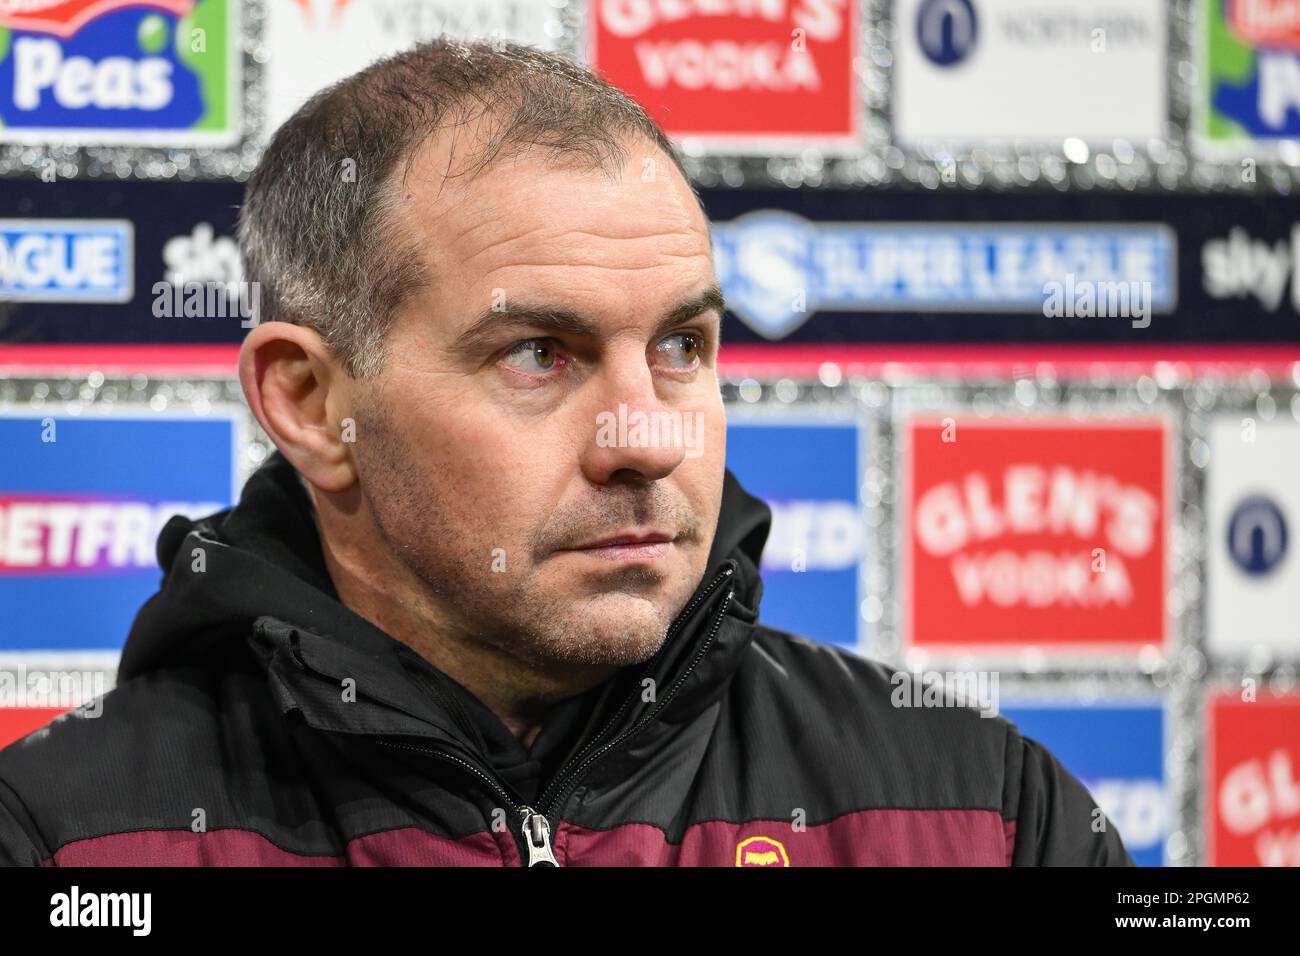 Ian Watson Head Coach of Huddersfield Giants during the pre match interviews during the Betfred Super League Round 6 match Huddersfield Giants vs St Helens at John Smith's Stadium, Huddersfield, United Kingdom, 23rd March 2023  (Photo by Craig Thomas/News Images) Stock Photo